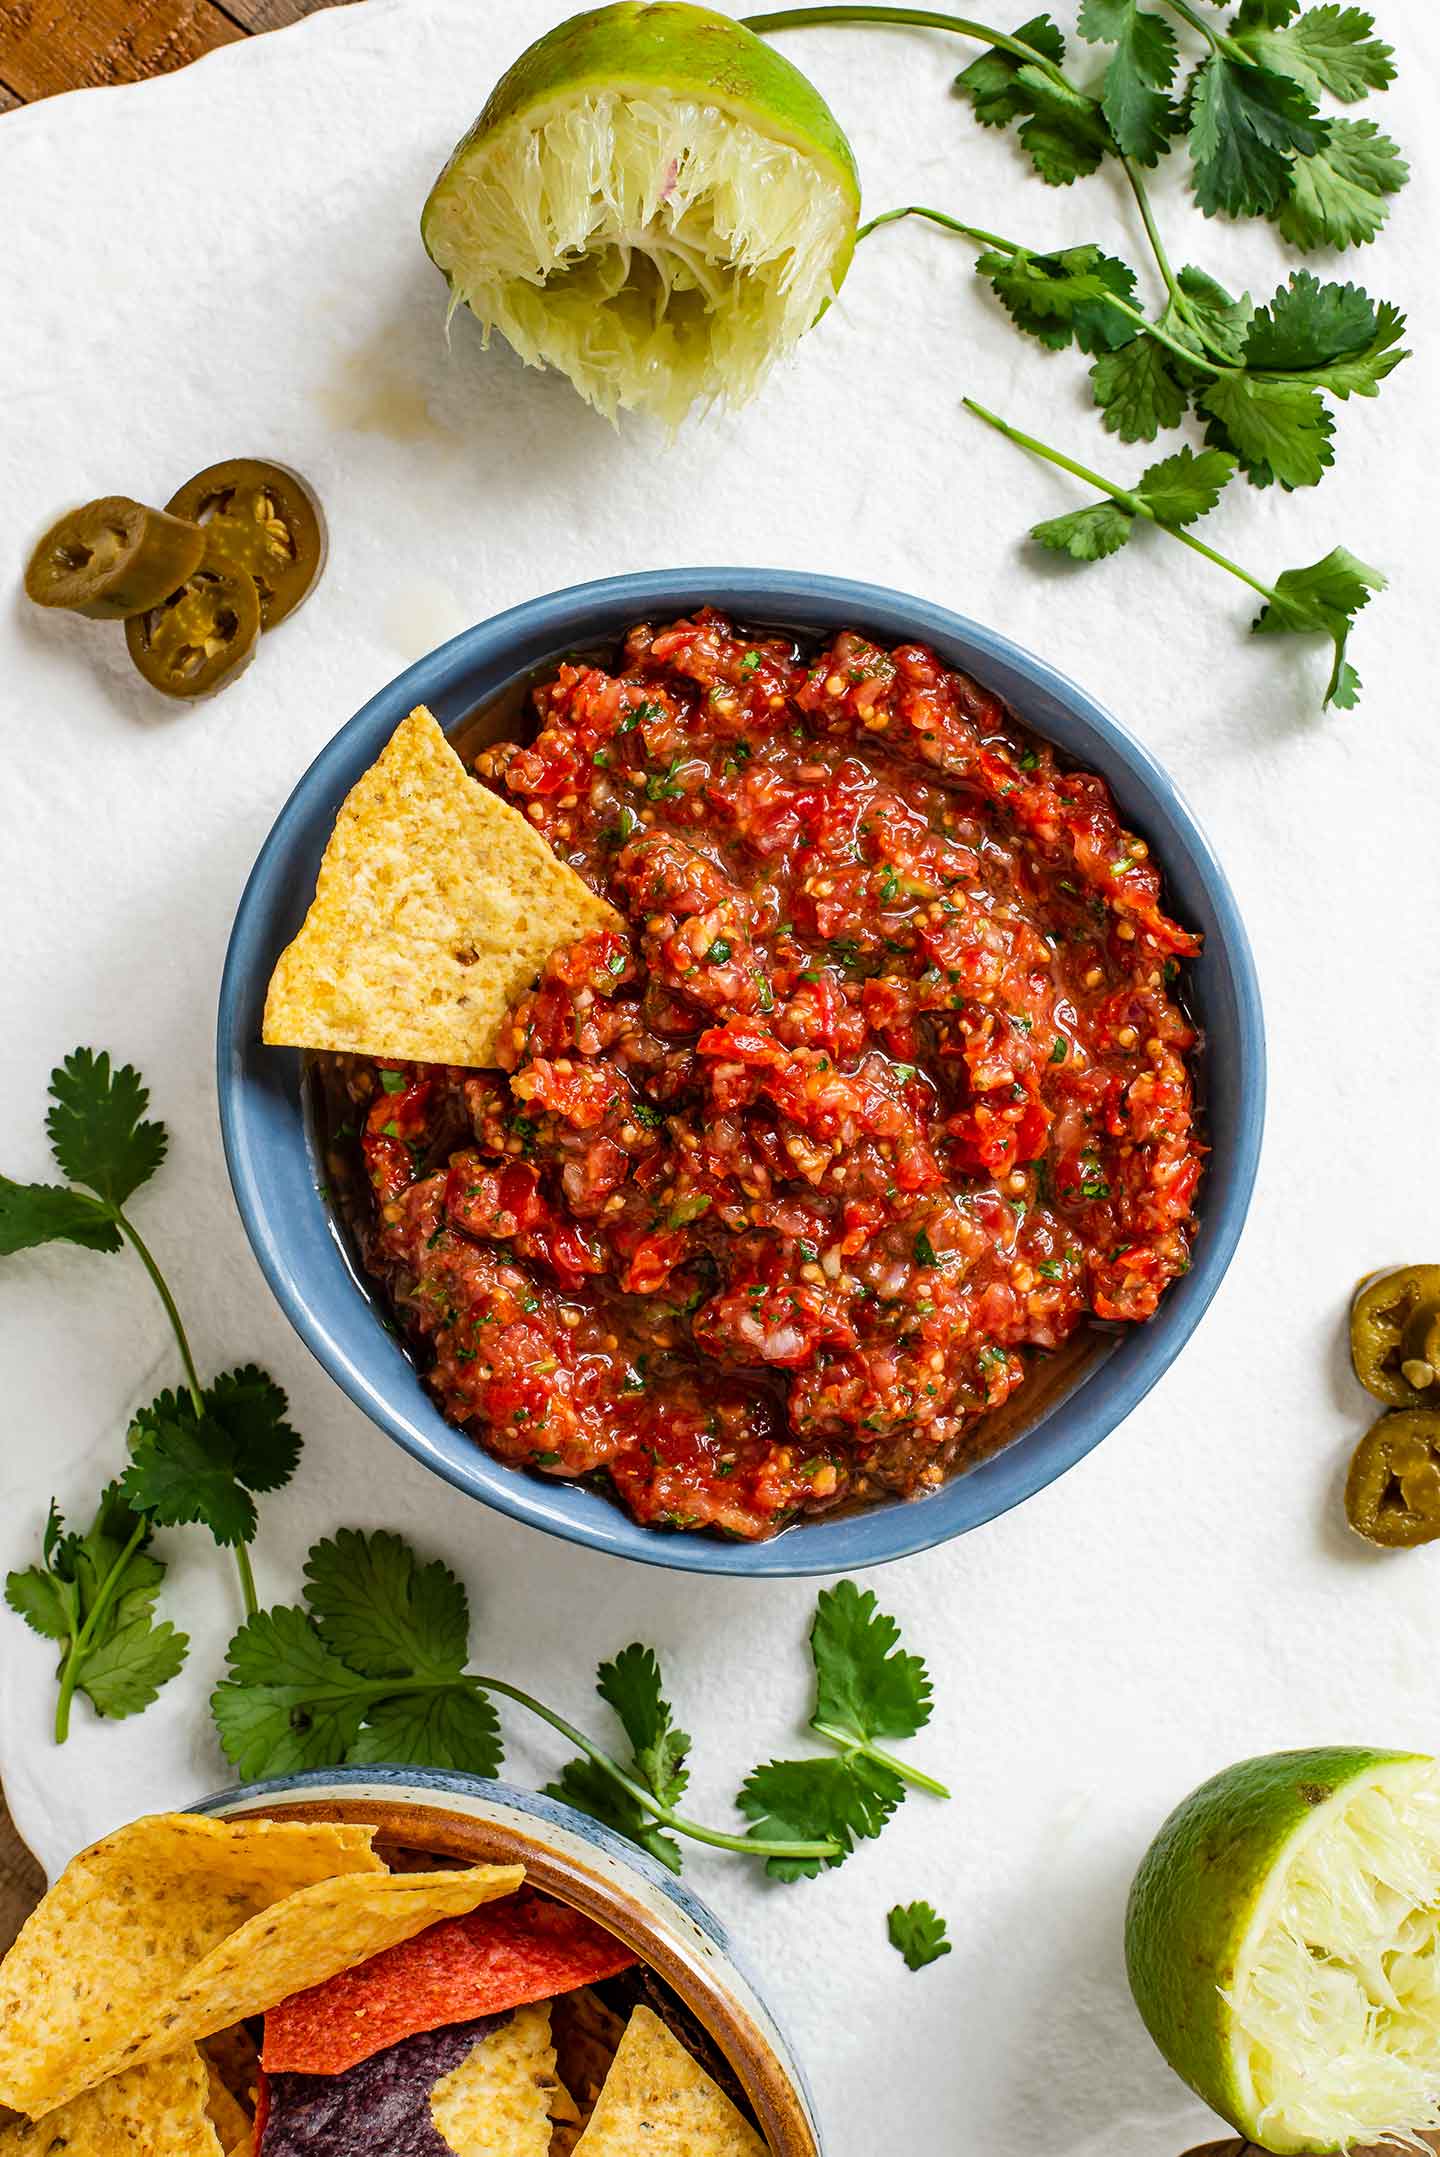 Top down view of easy grape tomato salsa in a shallow dish with a tortilla chip placed in the salsa.